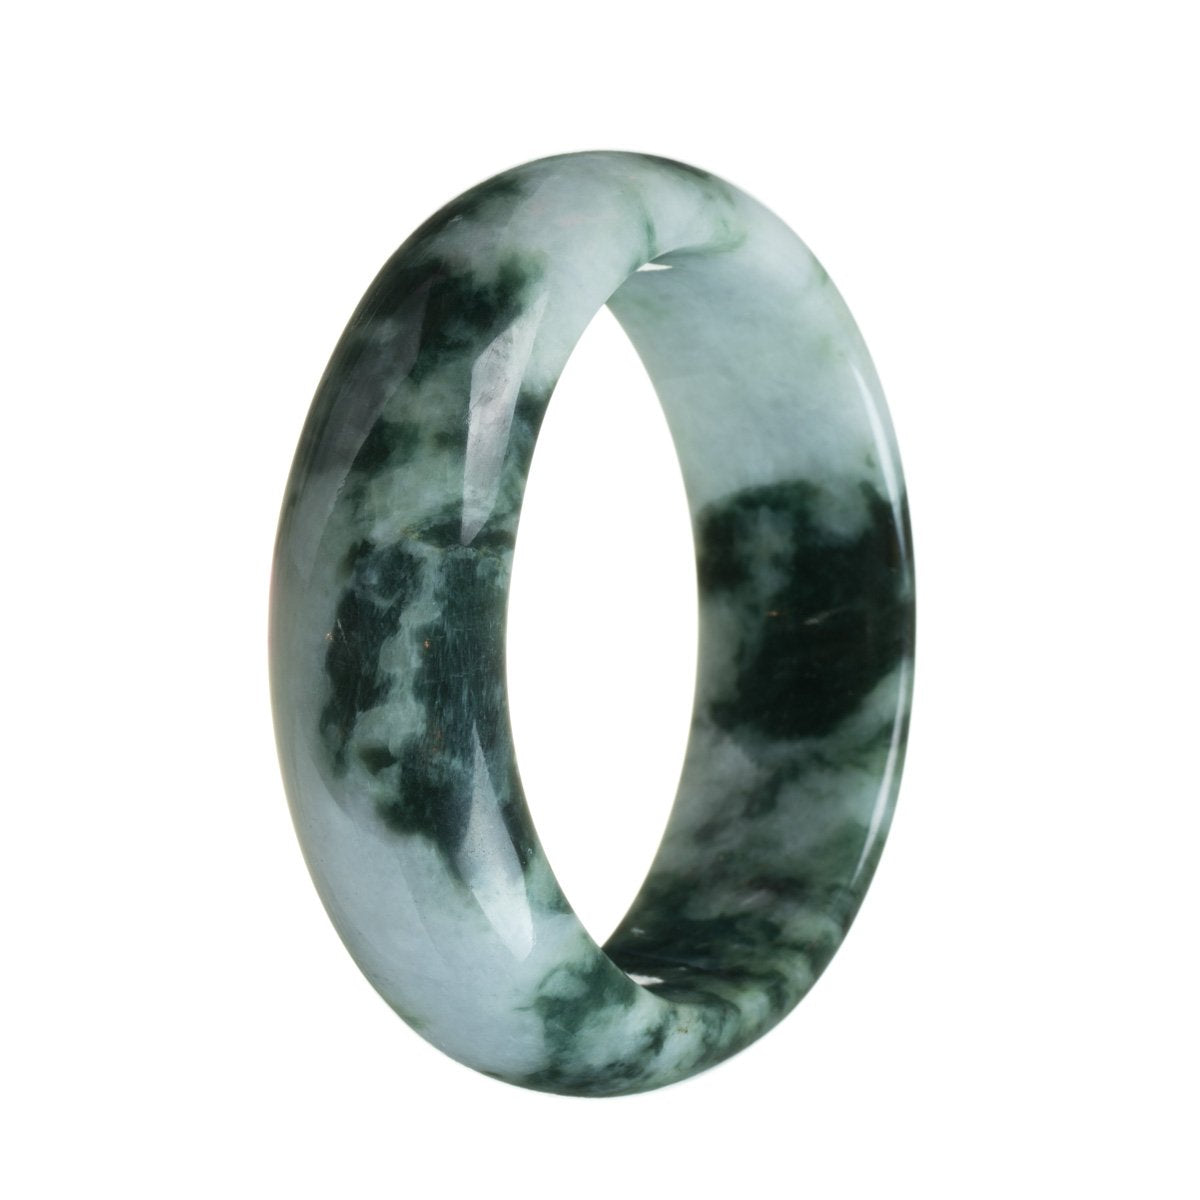 A close-up image of a beautiful half moon jadeite bracelet, featuring a genuine and natural green on white pattern. The bracelet measures 61mm in size and is a stunning accessory from the brand MAYS.